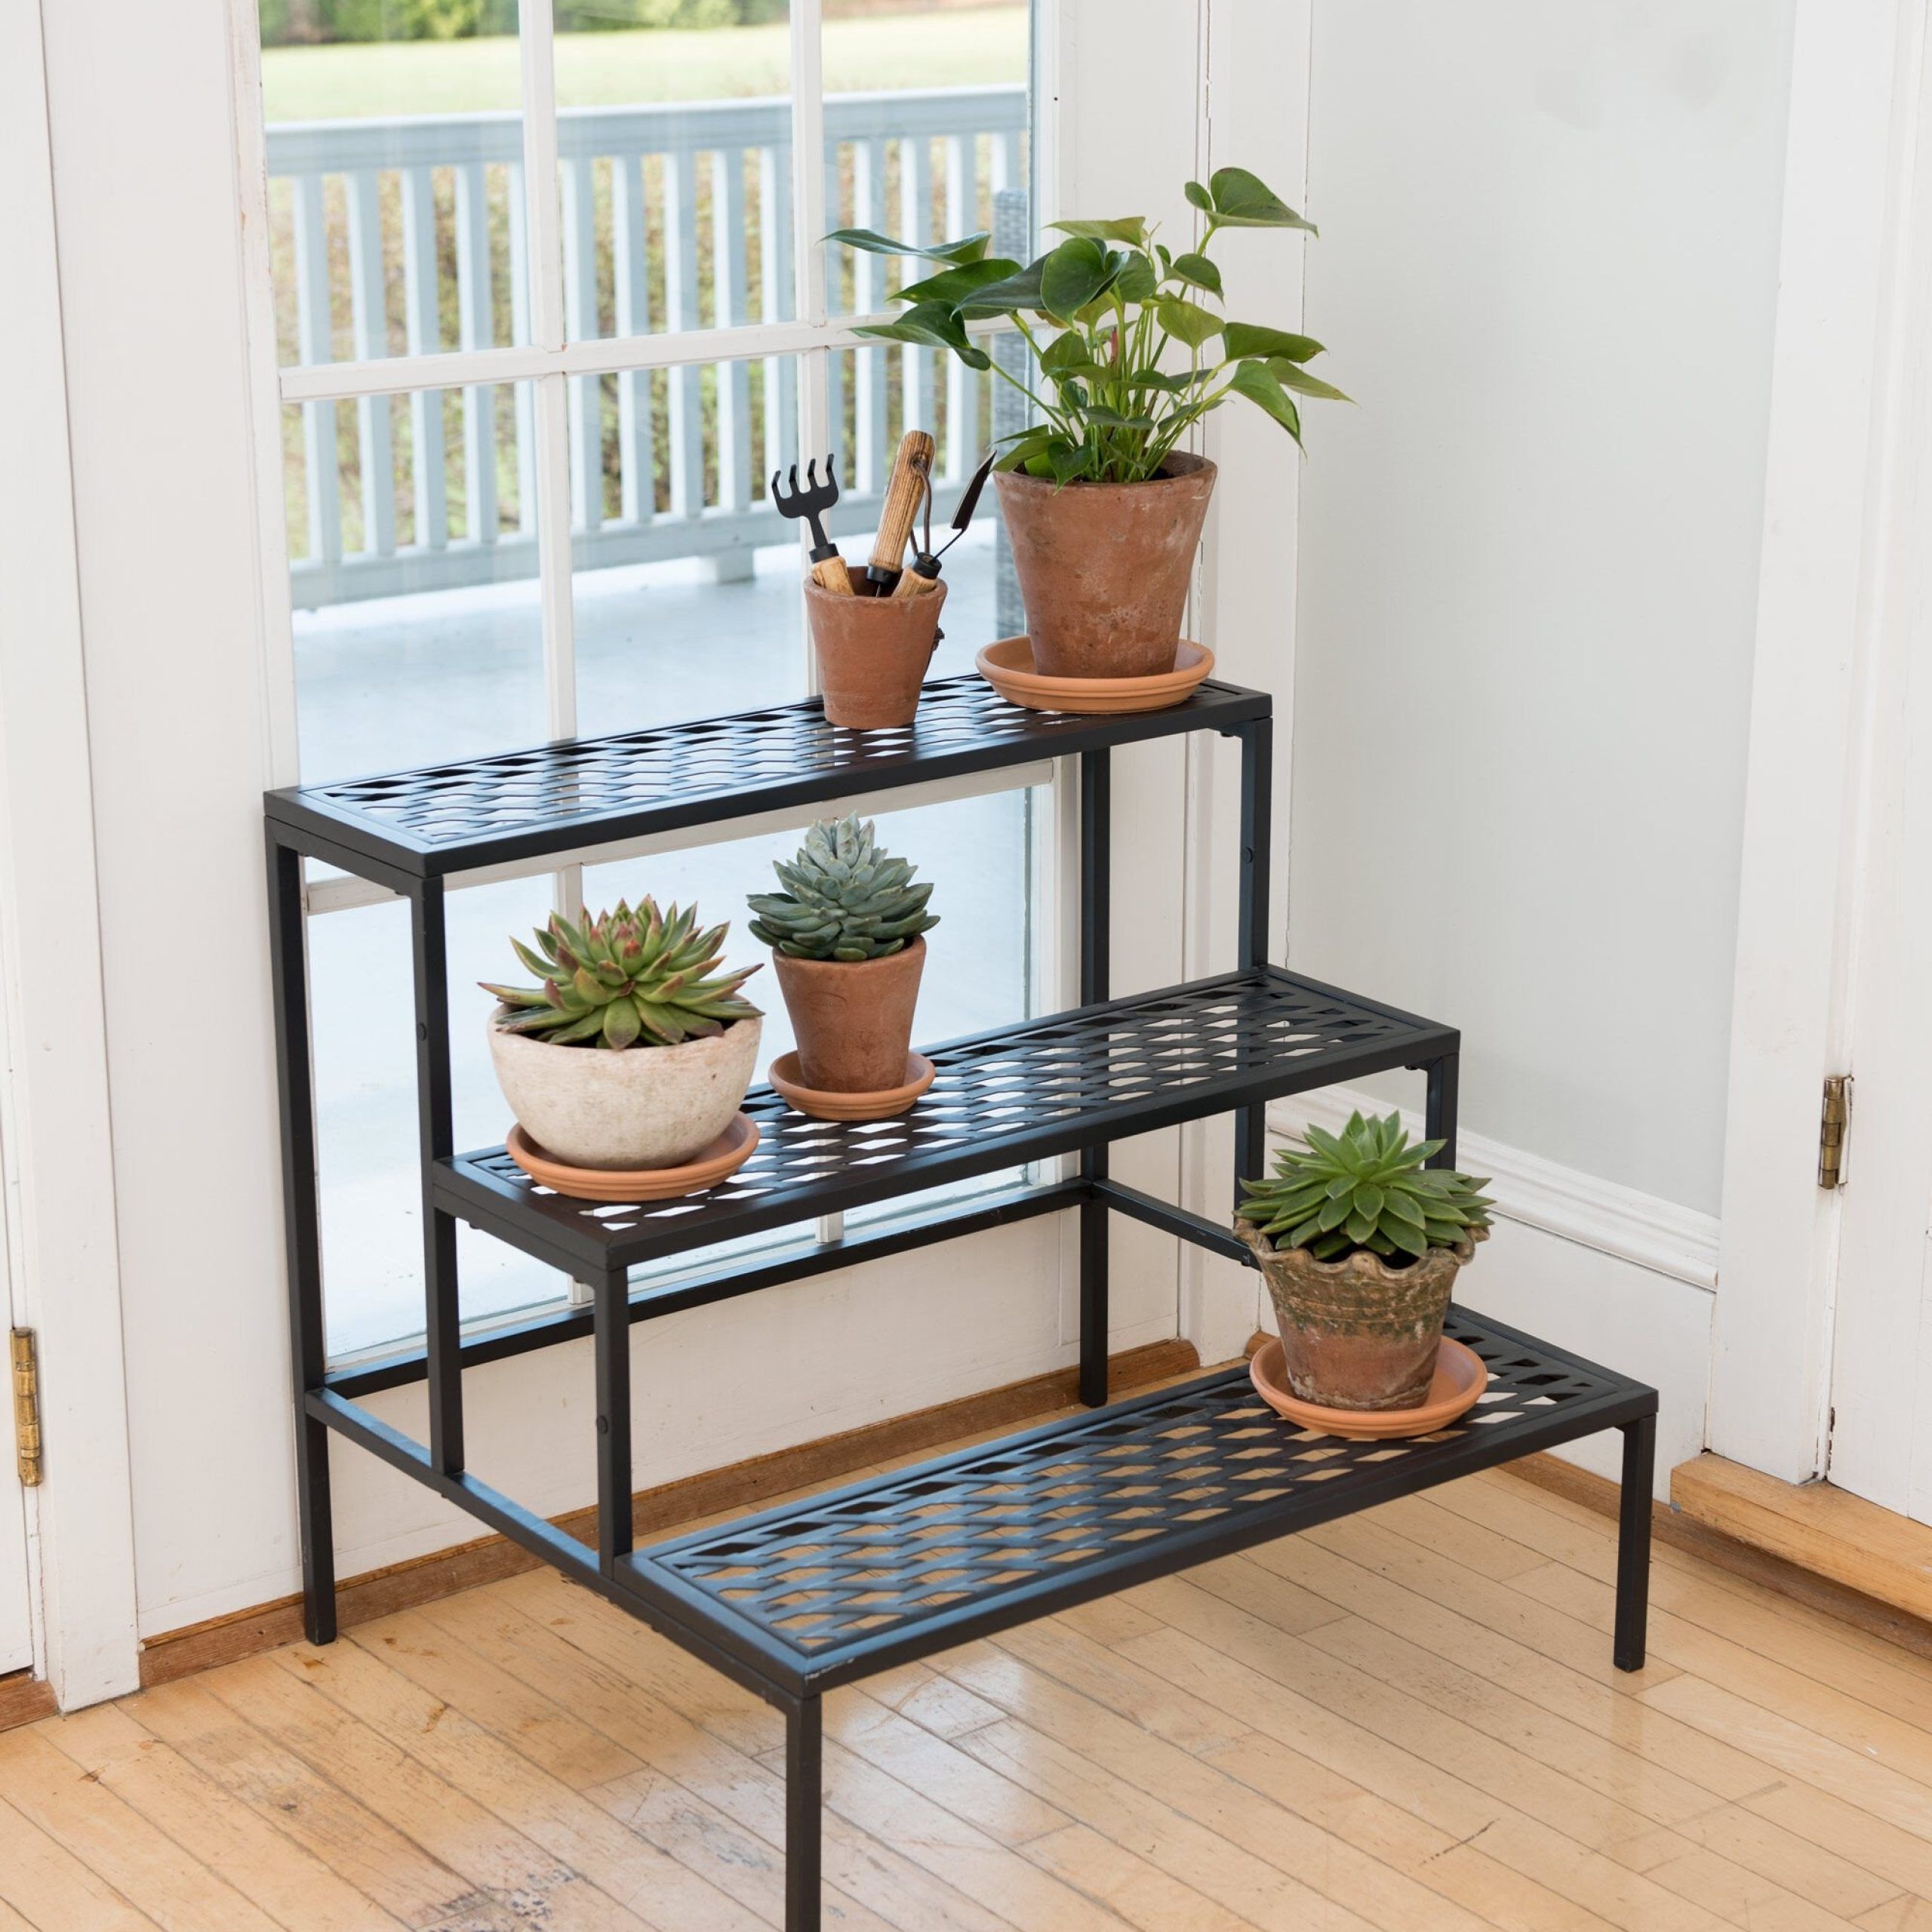 Lattice Multi Tiered Plant Stand – Black | Gardener's Supply Throughout Three Tiered Plant Stands (View 3 of 15)